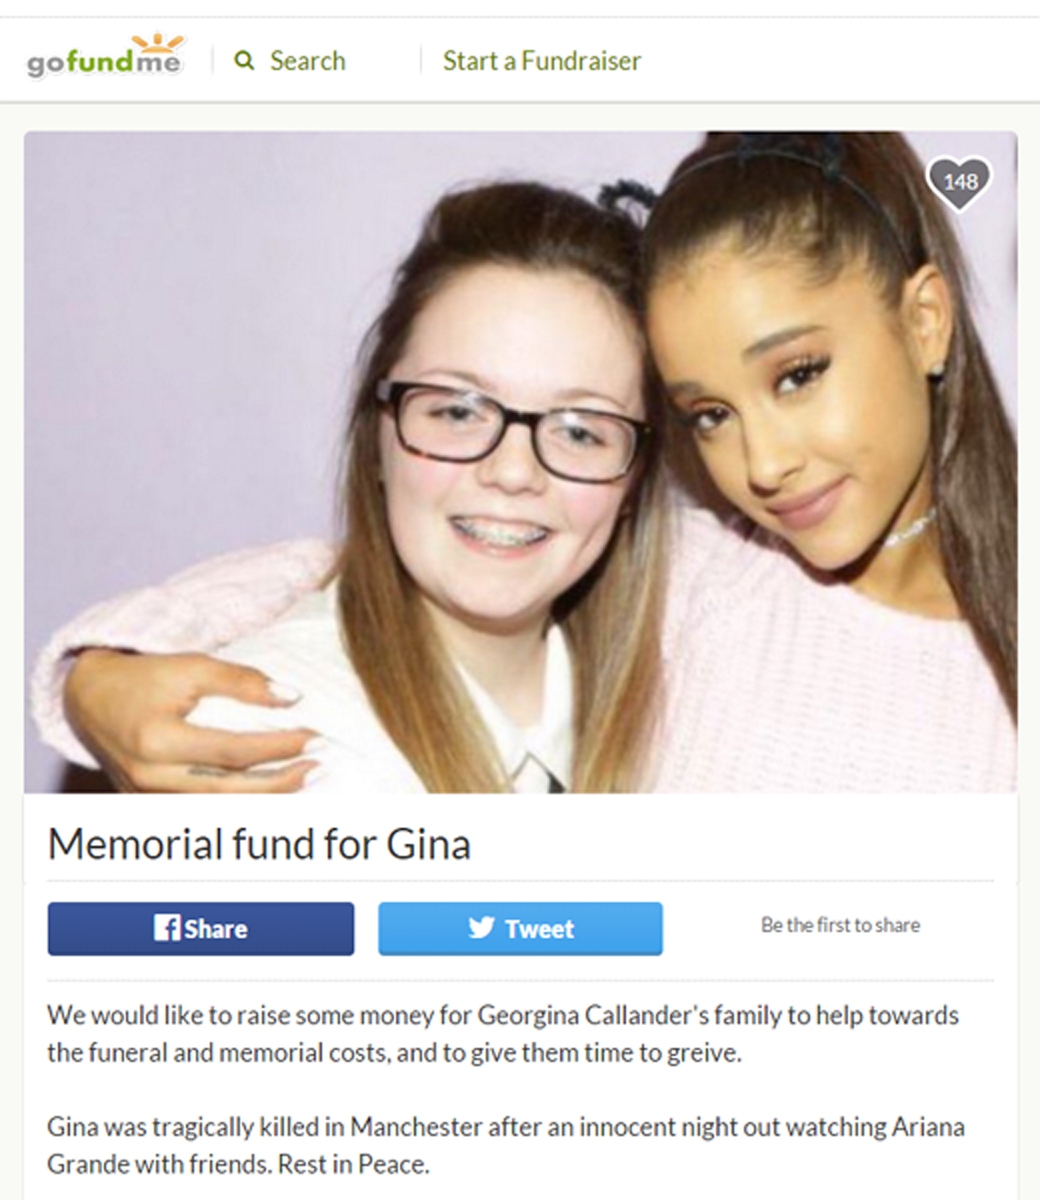 Gofundme page set up in memory of Georgina Callander (left) who has died after the explosion at the Manchester Arena where she had been attending a concert by Ariana Grande (right).